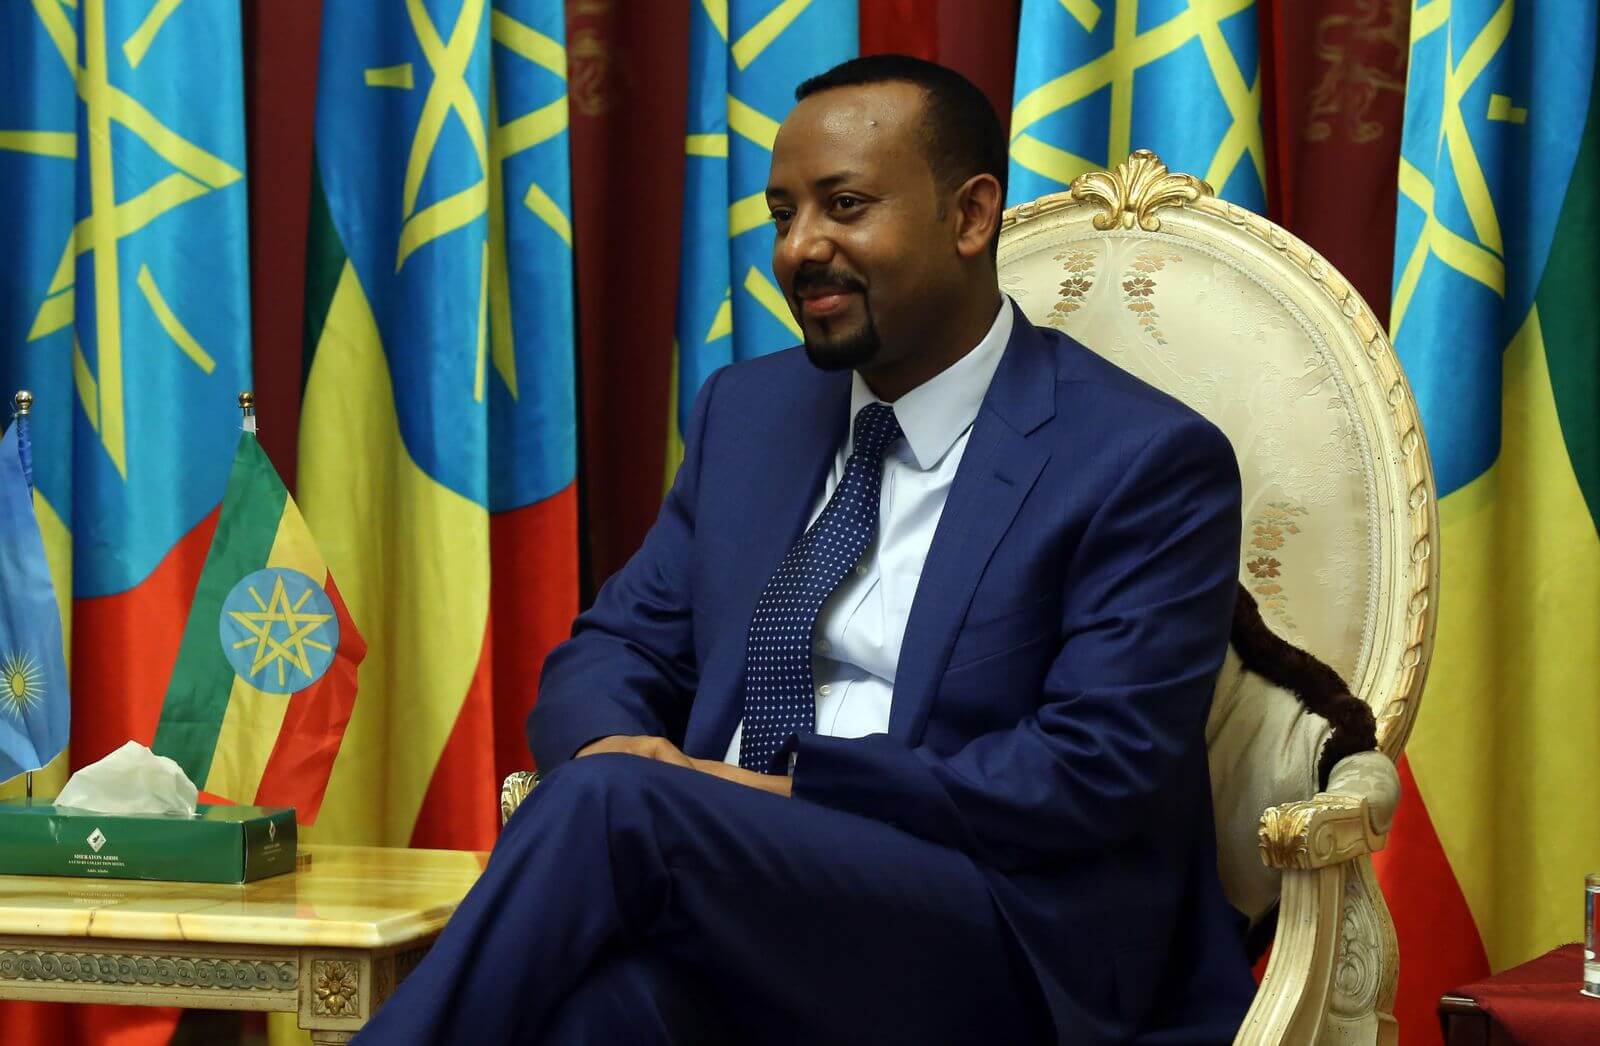 Ethiopia Accuses US of Meddling in Internal Affairs Following Sanctions